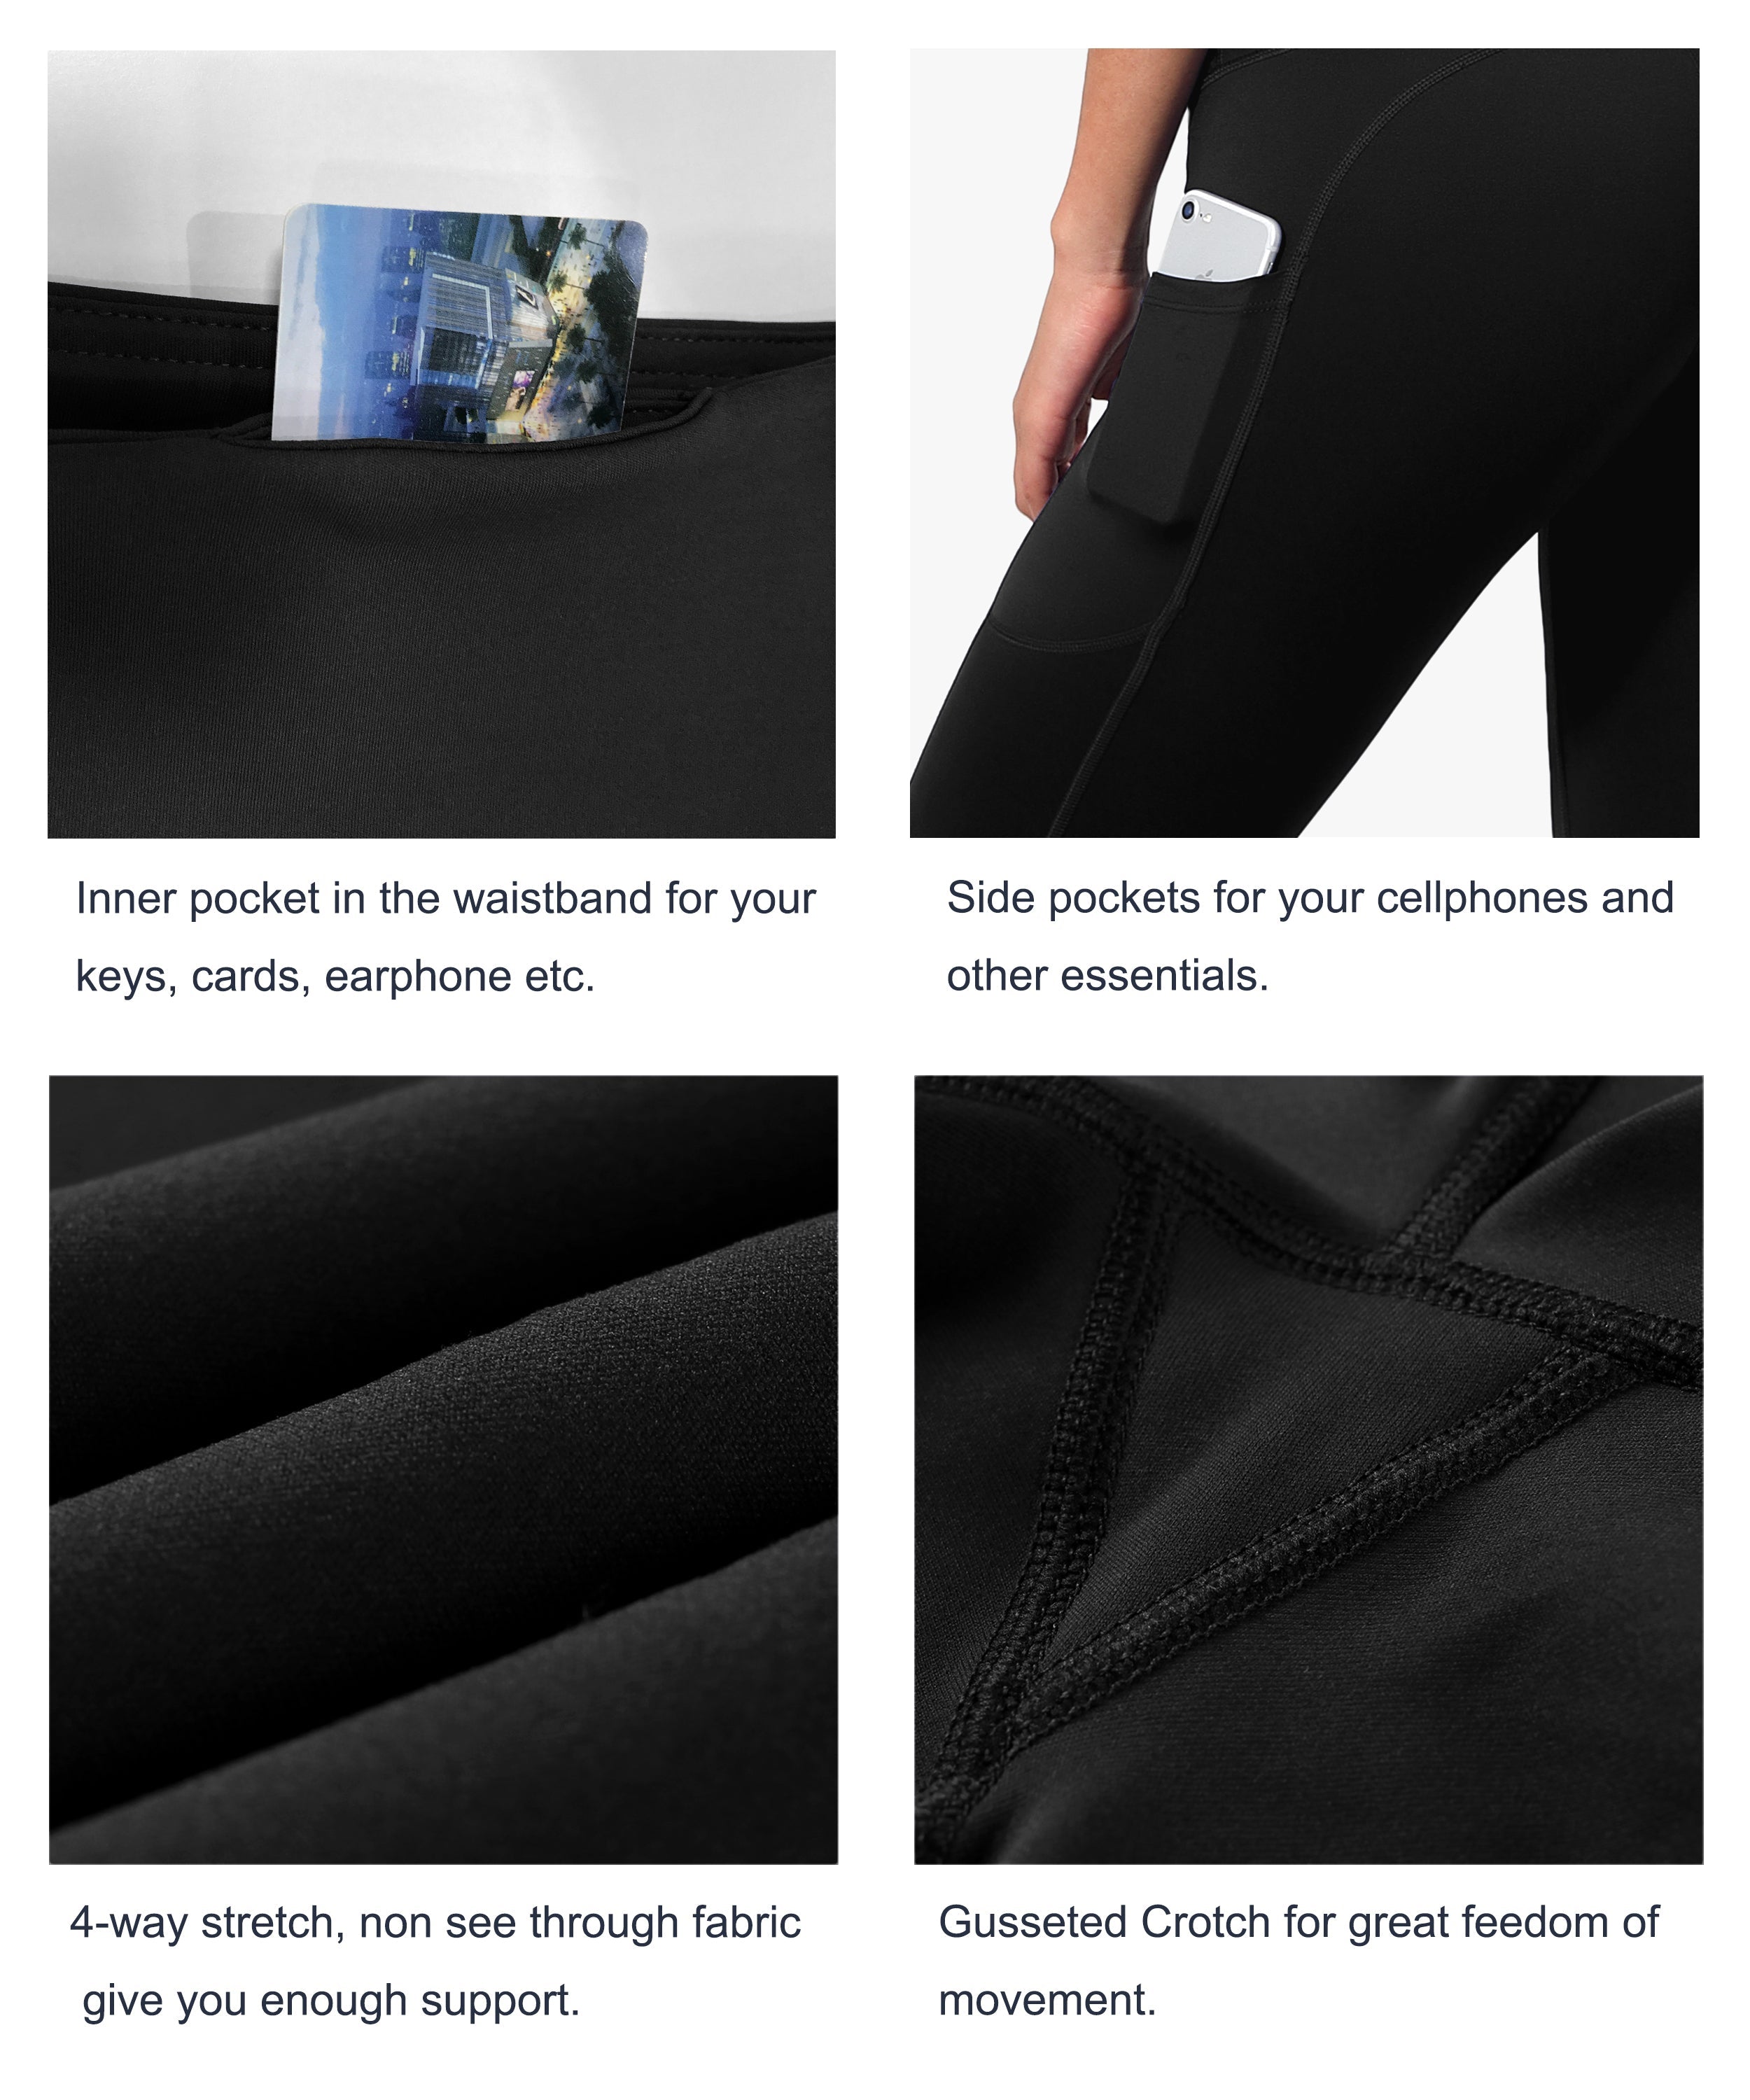 Hip Line Side Pockets Running Pants black Sexy Hip Line Side Pockets 75%Nylon/25%Spandex Fabric doesn't attract lint easily 4-way stretch No see-through Moisture-wicking Tummy control Inner pocket Two lengths